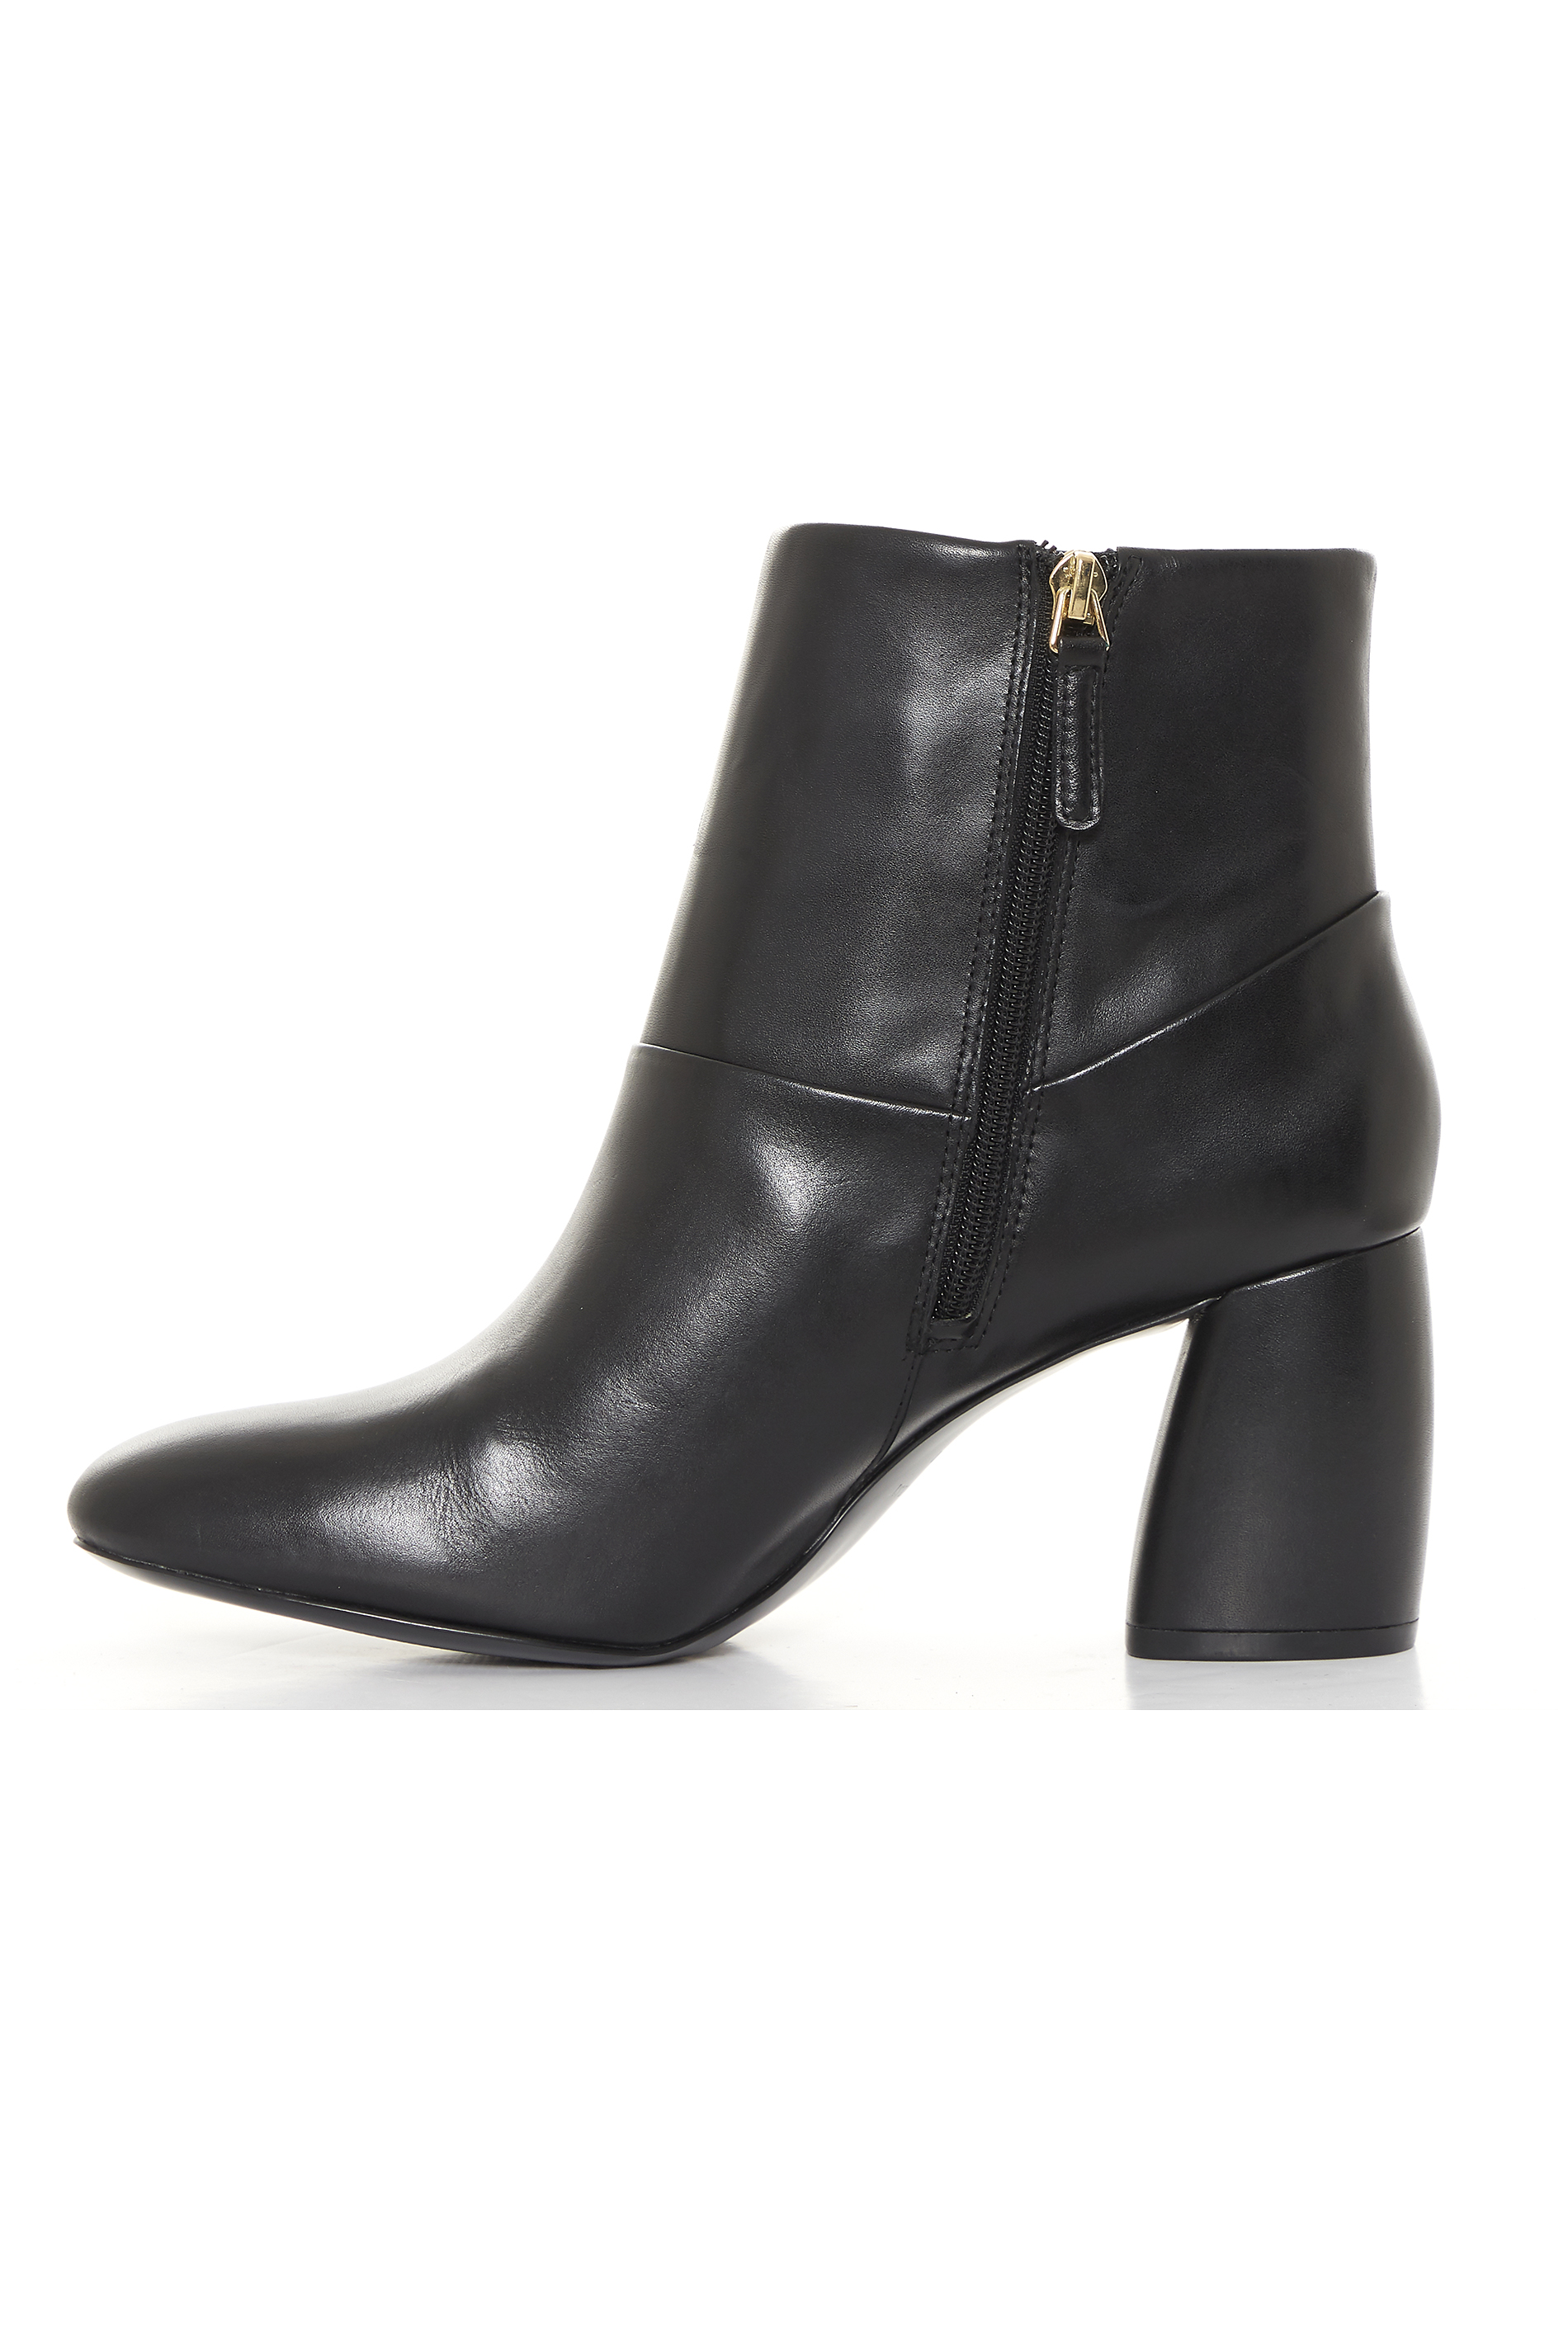 NINE WEST Black Kirtley Leather Heeled Ankle Boots | Long Tall Sally